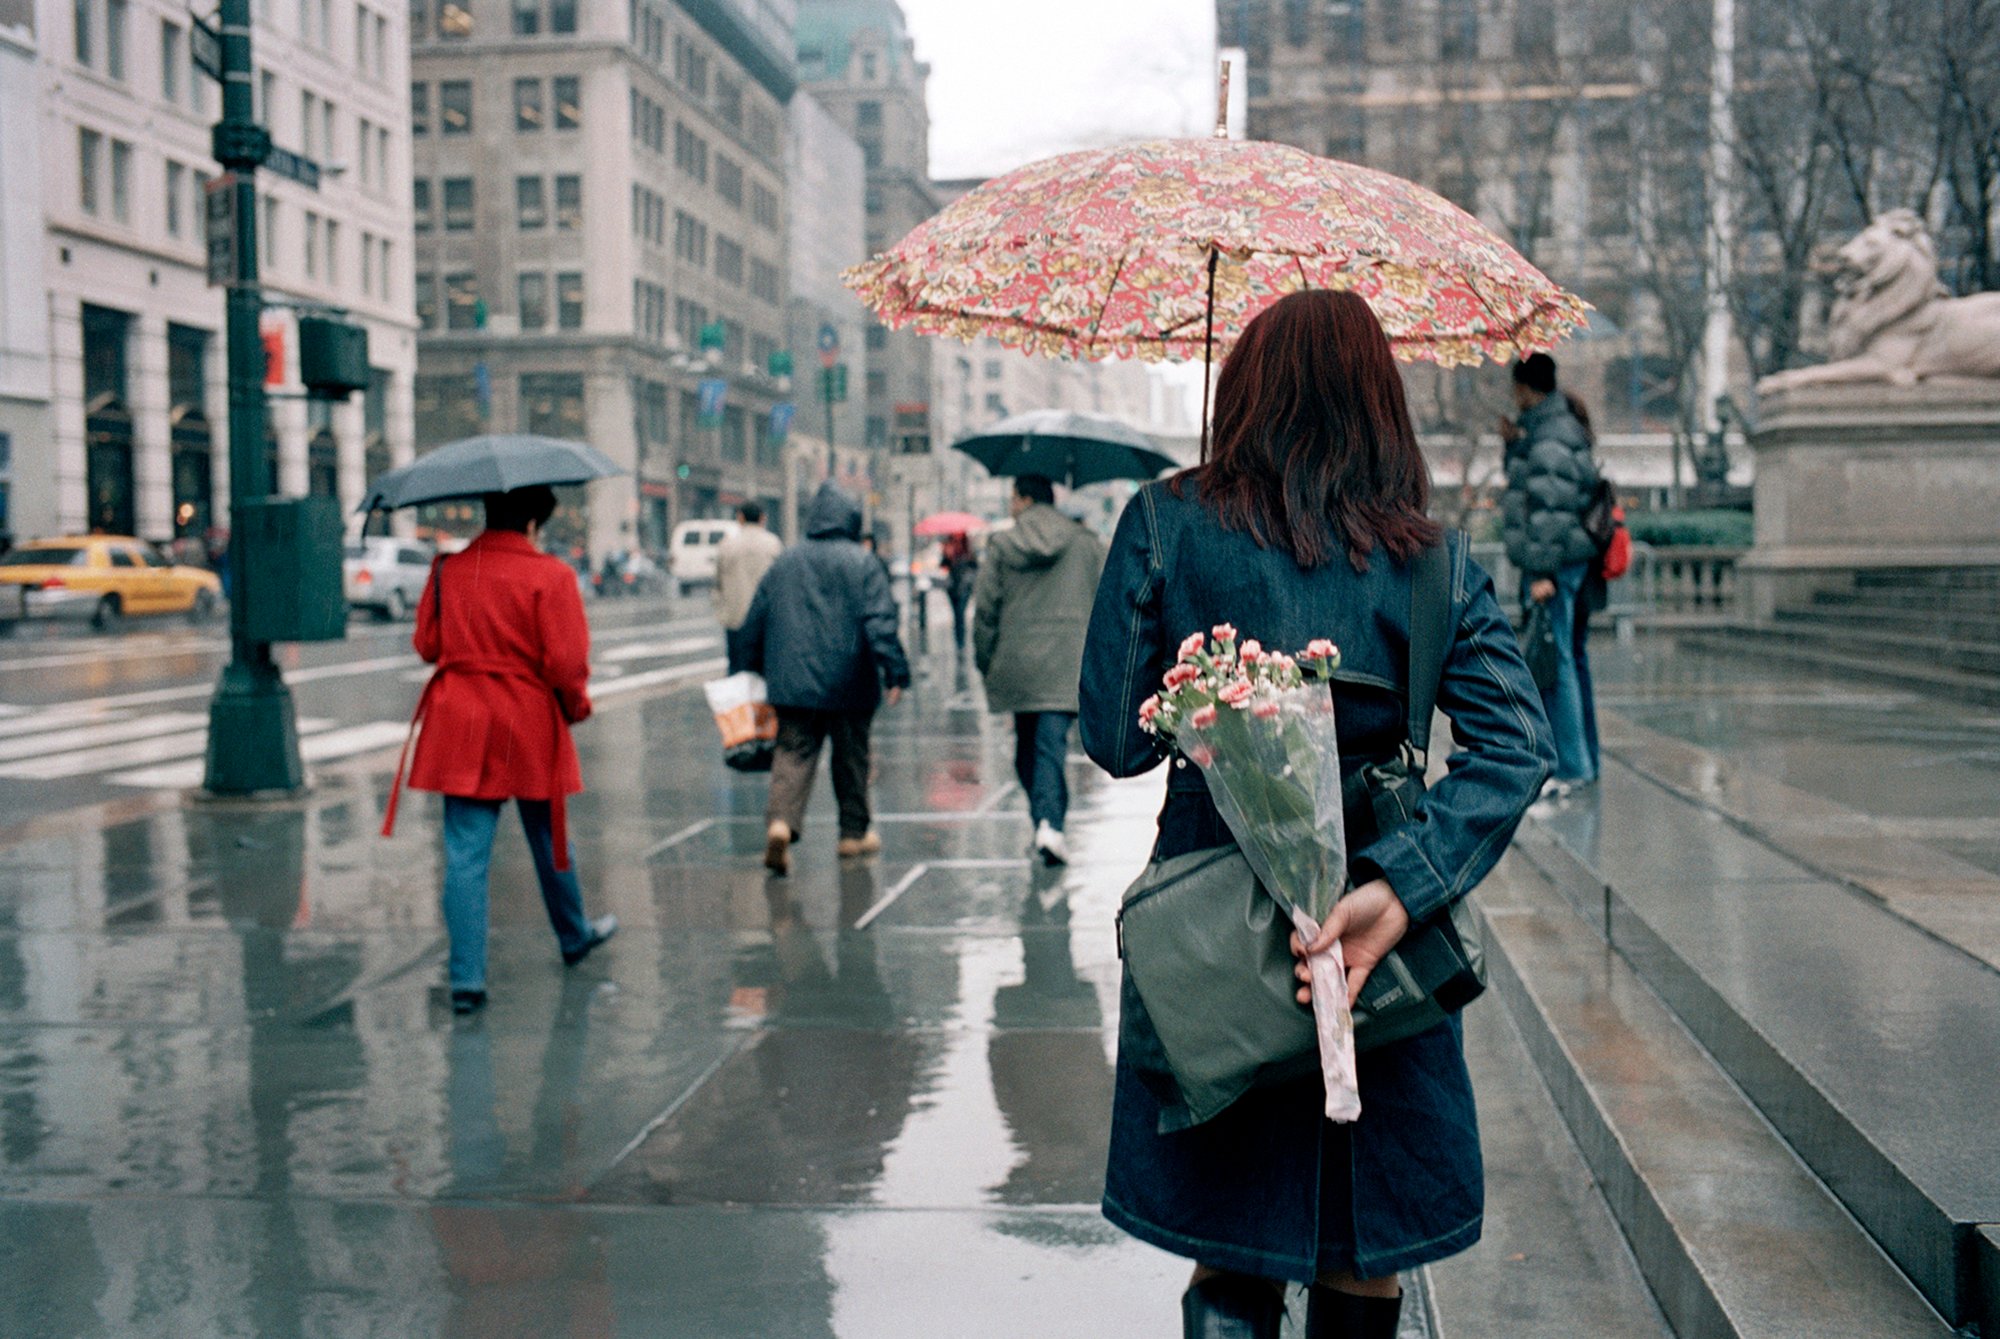 A person walking on a rainy street in front of the New York Public library, holding a flower printed umbrella and a bouquet of carnations behind their back.